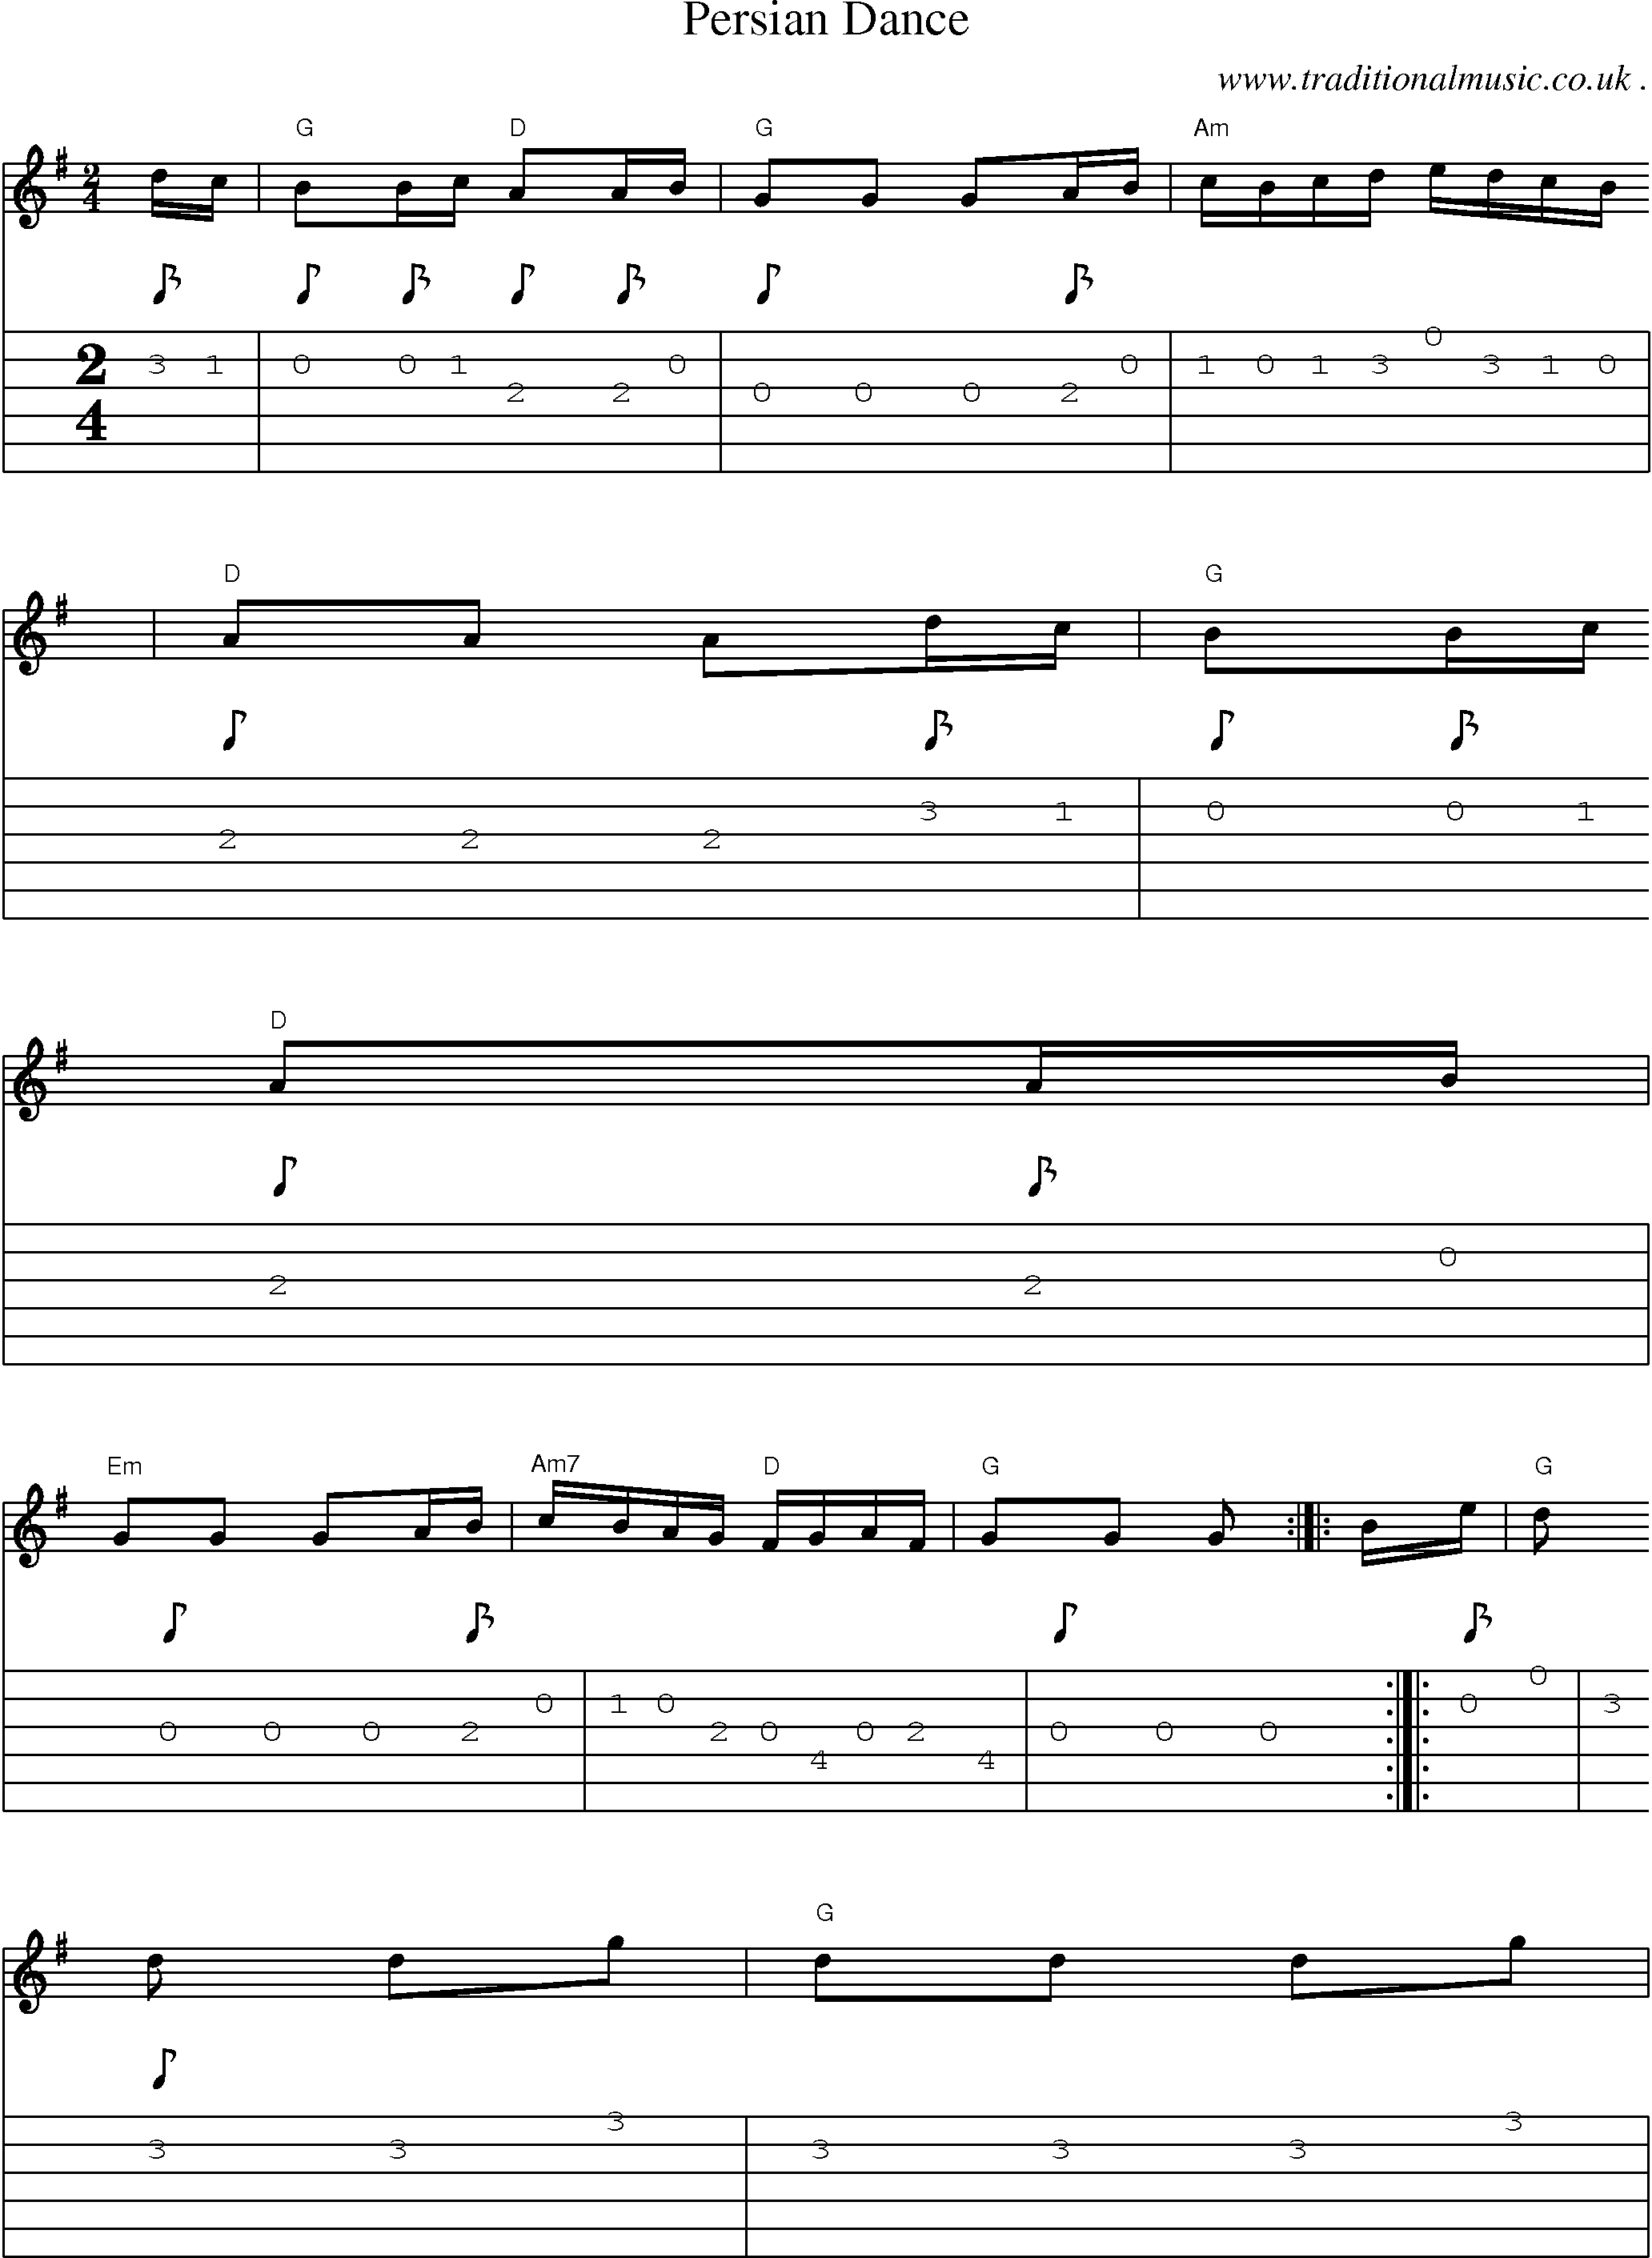 Sheet-music  score, Chords and Guitar Tabs for Persian Dance